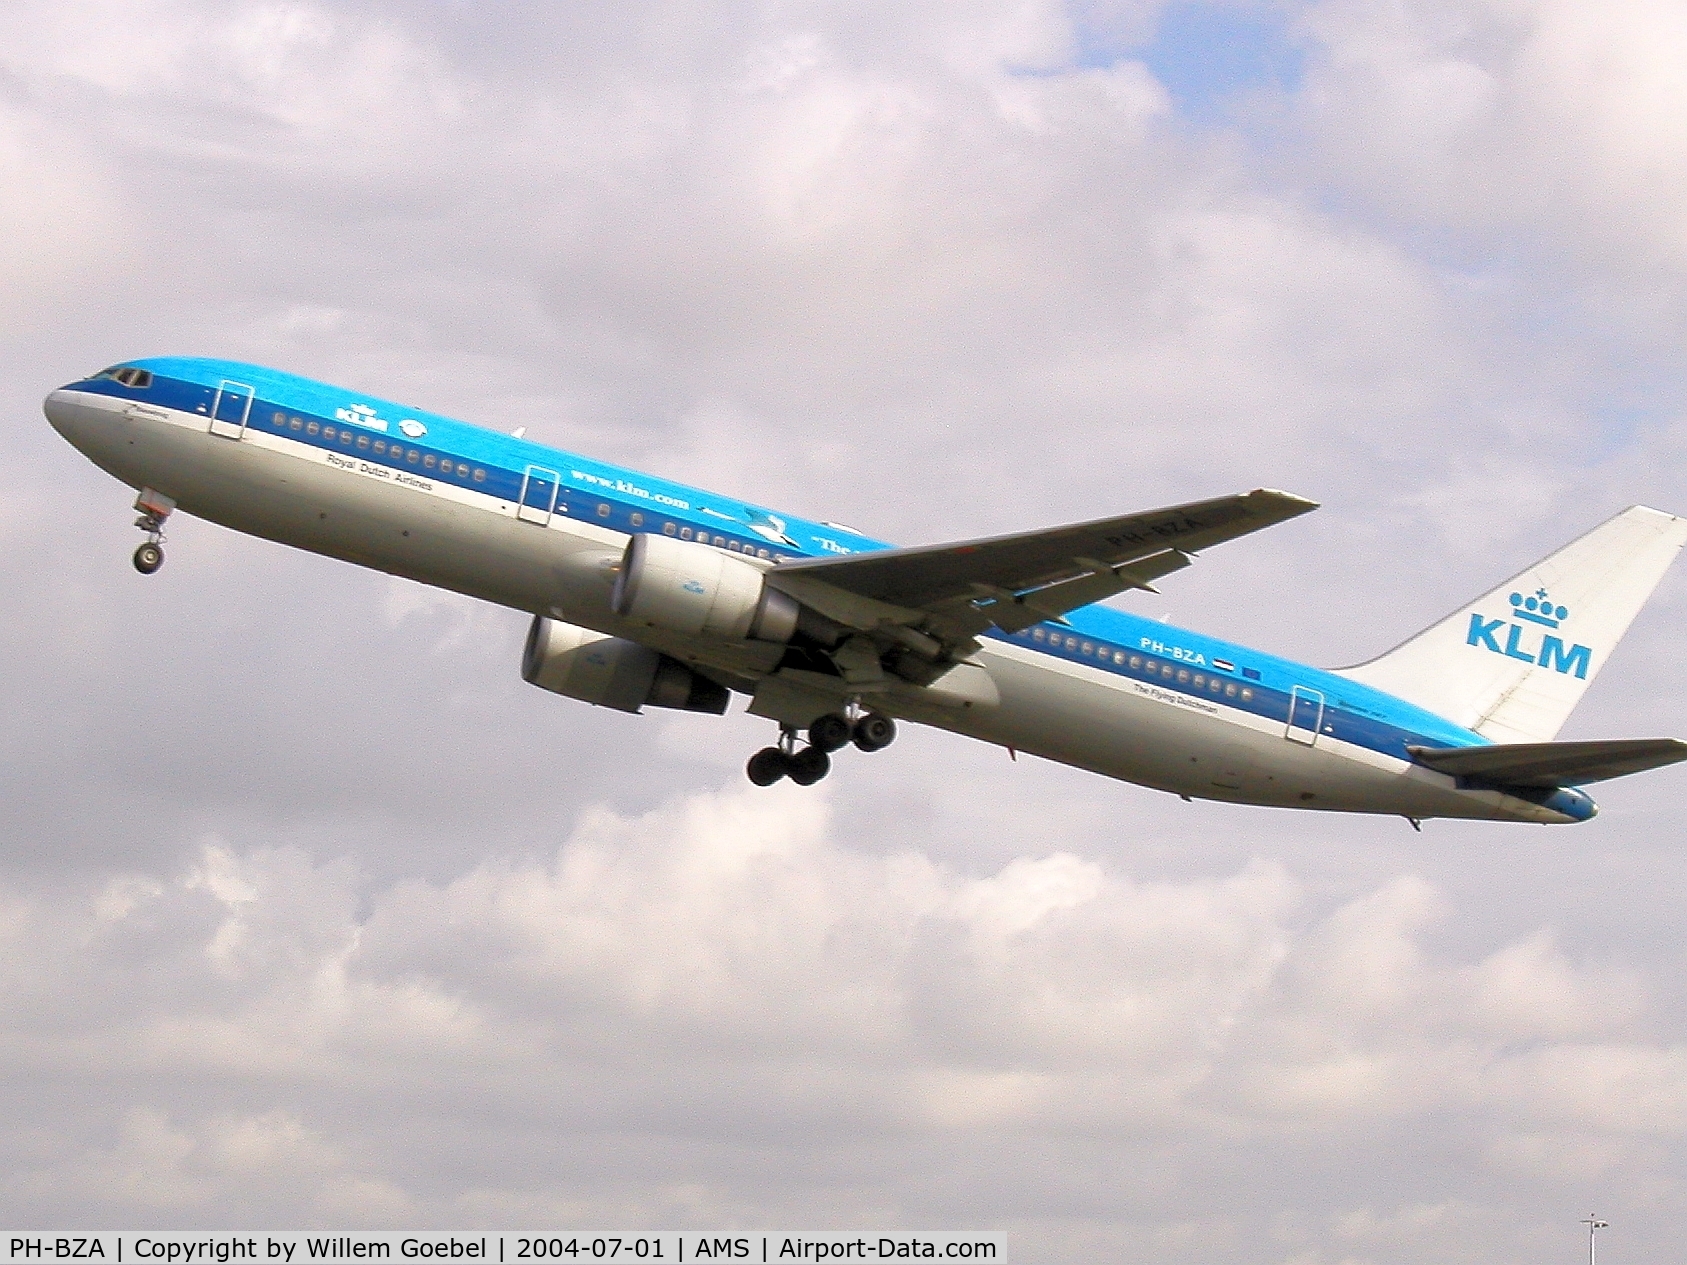 PH-BZA, 1995 Boeing 767-306/ER C/N 27957, Take off from runway 36L of Schiphol Airport 
(In the colours with the Swan)